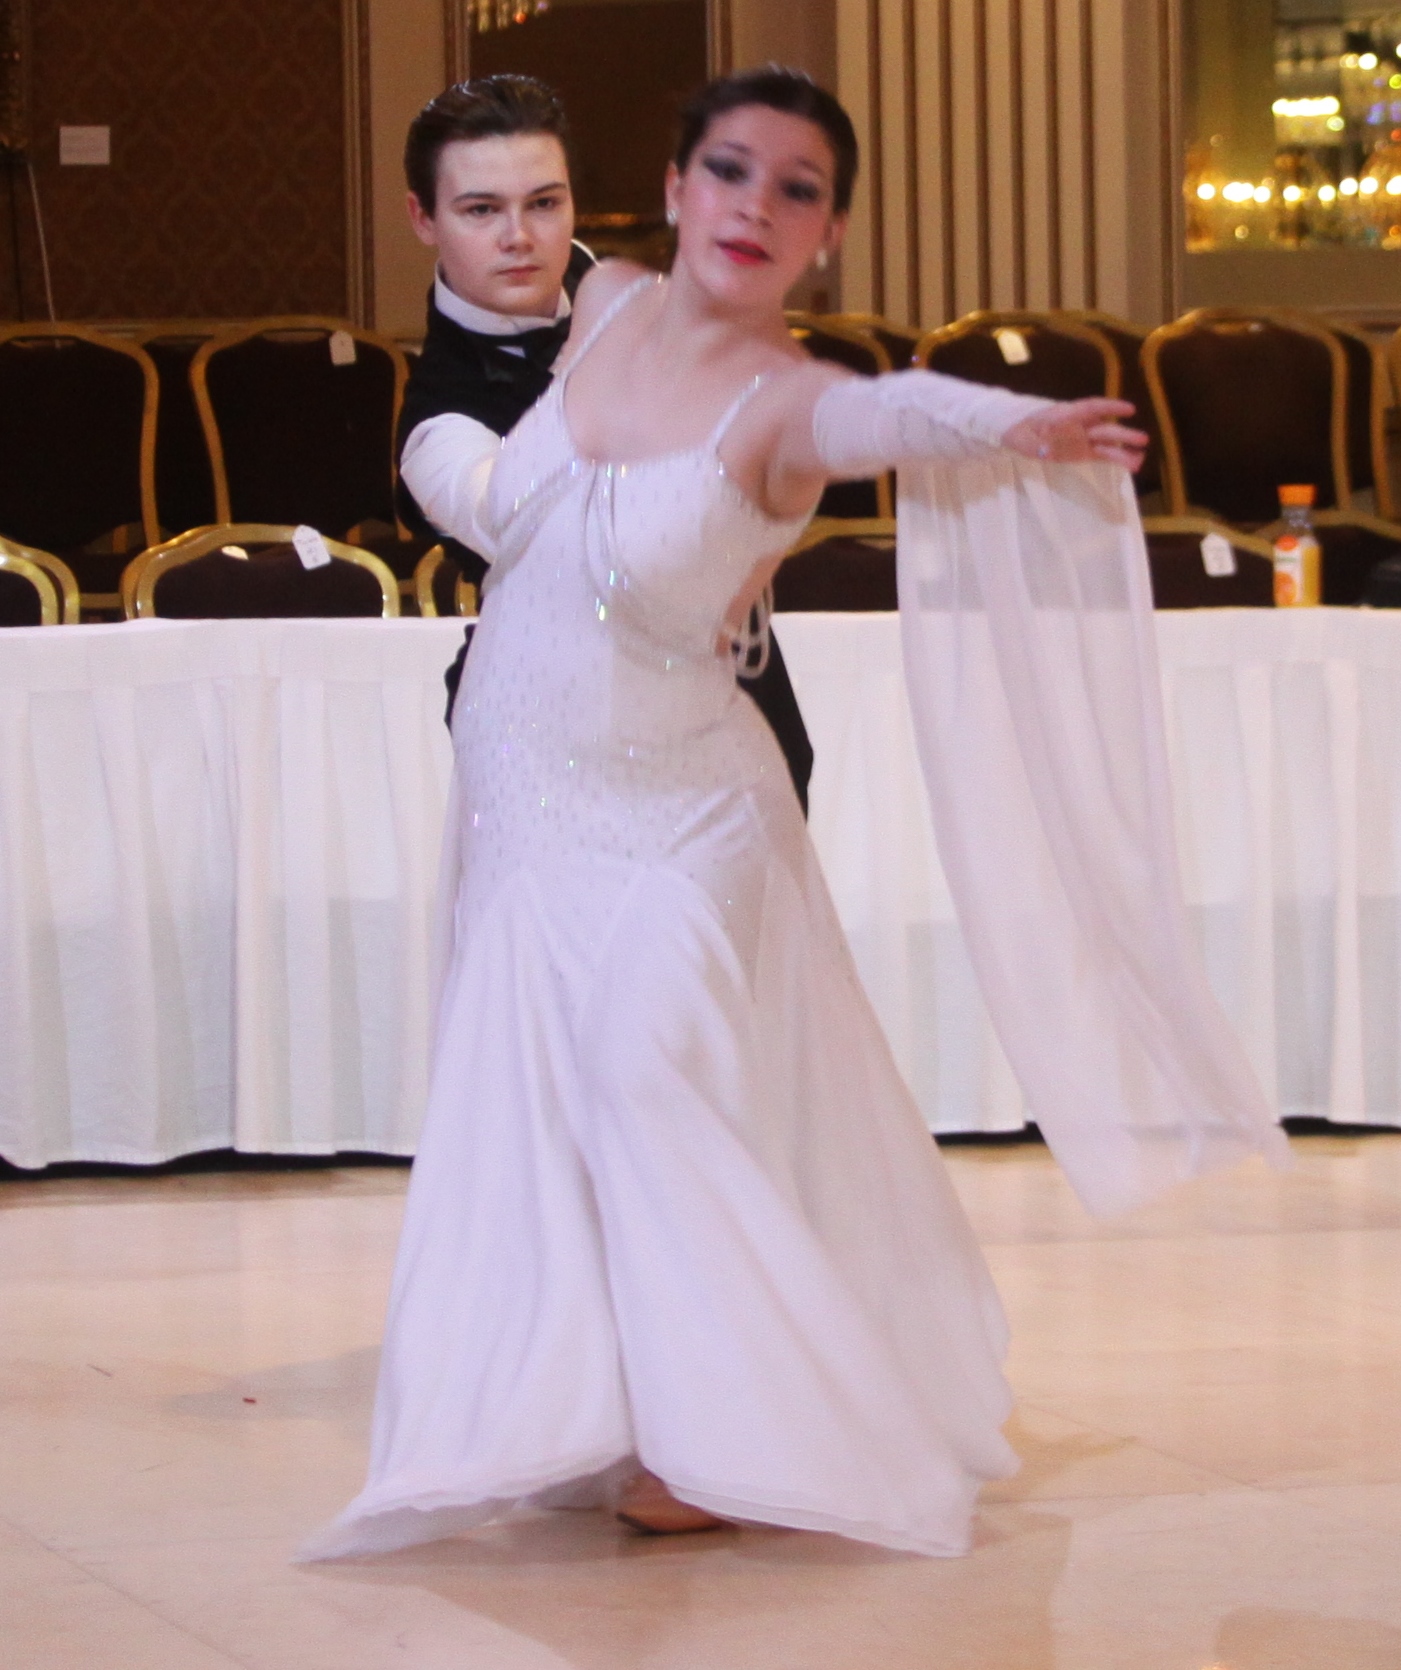 Wisconsin Youth Wins at State Ballroom Dance Competitions United